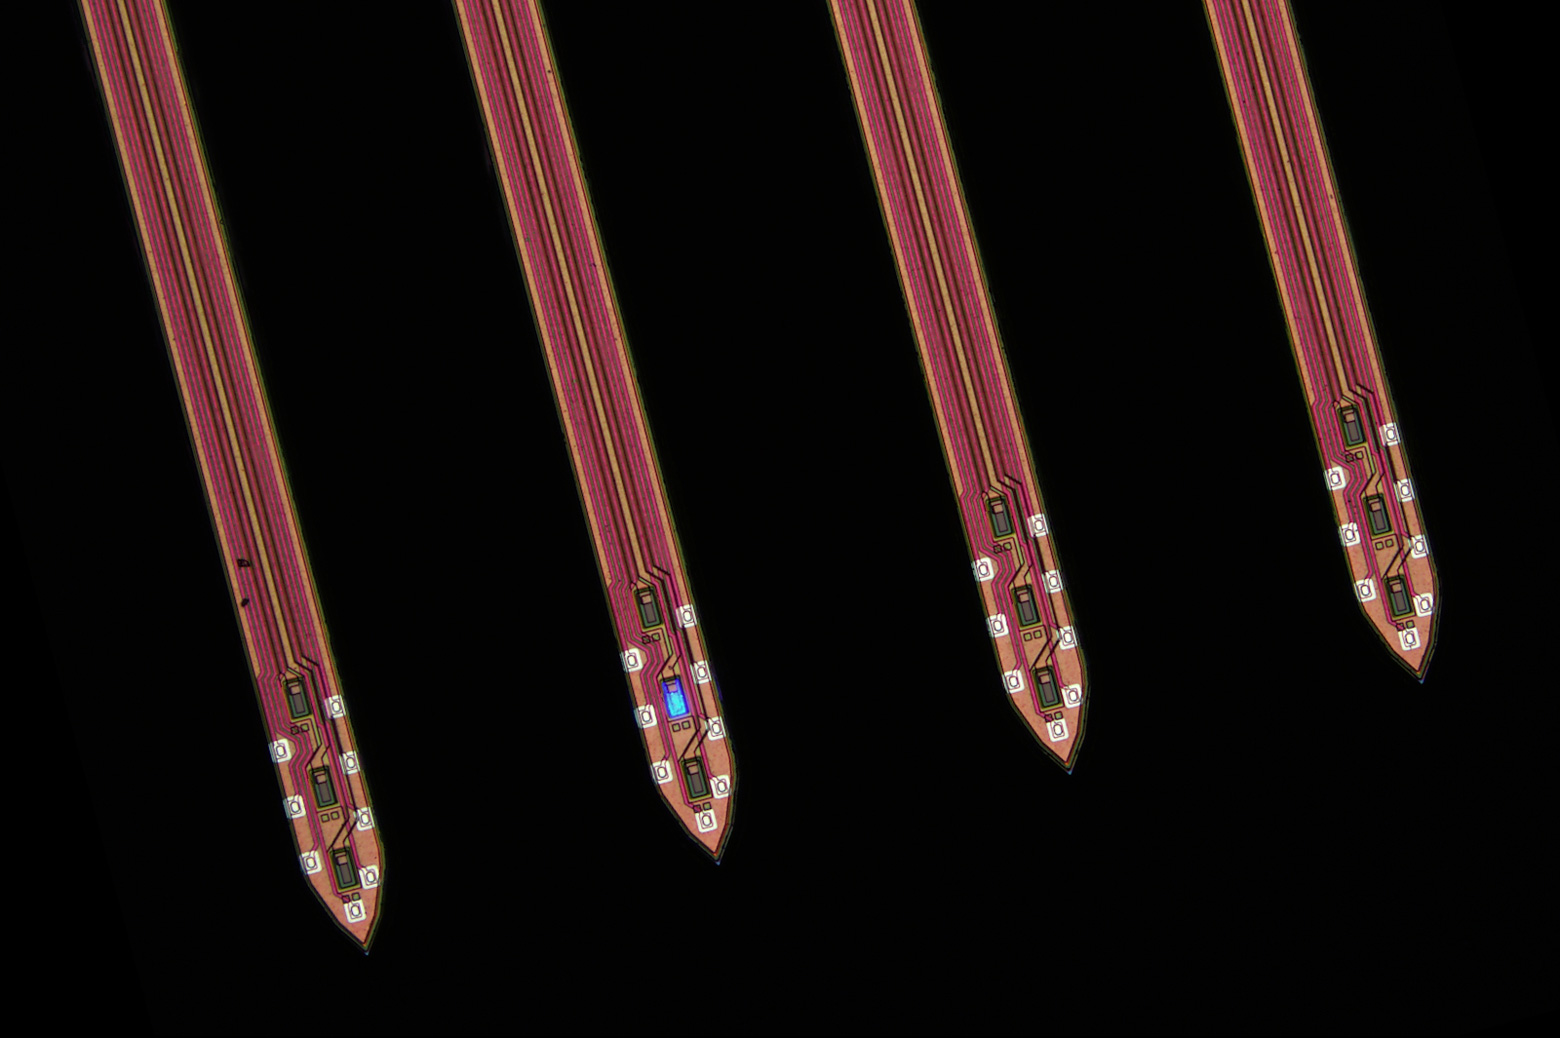 A close-up of four probe shanks, each 0.07 millimeters across. One of the LEDs, tiny enough to target a single neuron, is illuminated. The receiving electrodes appear as pale spots around the edges of each tip.